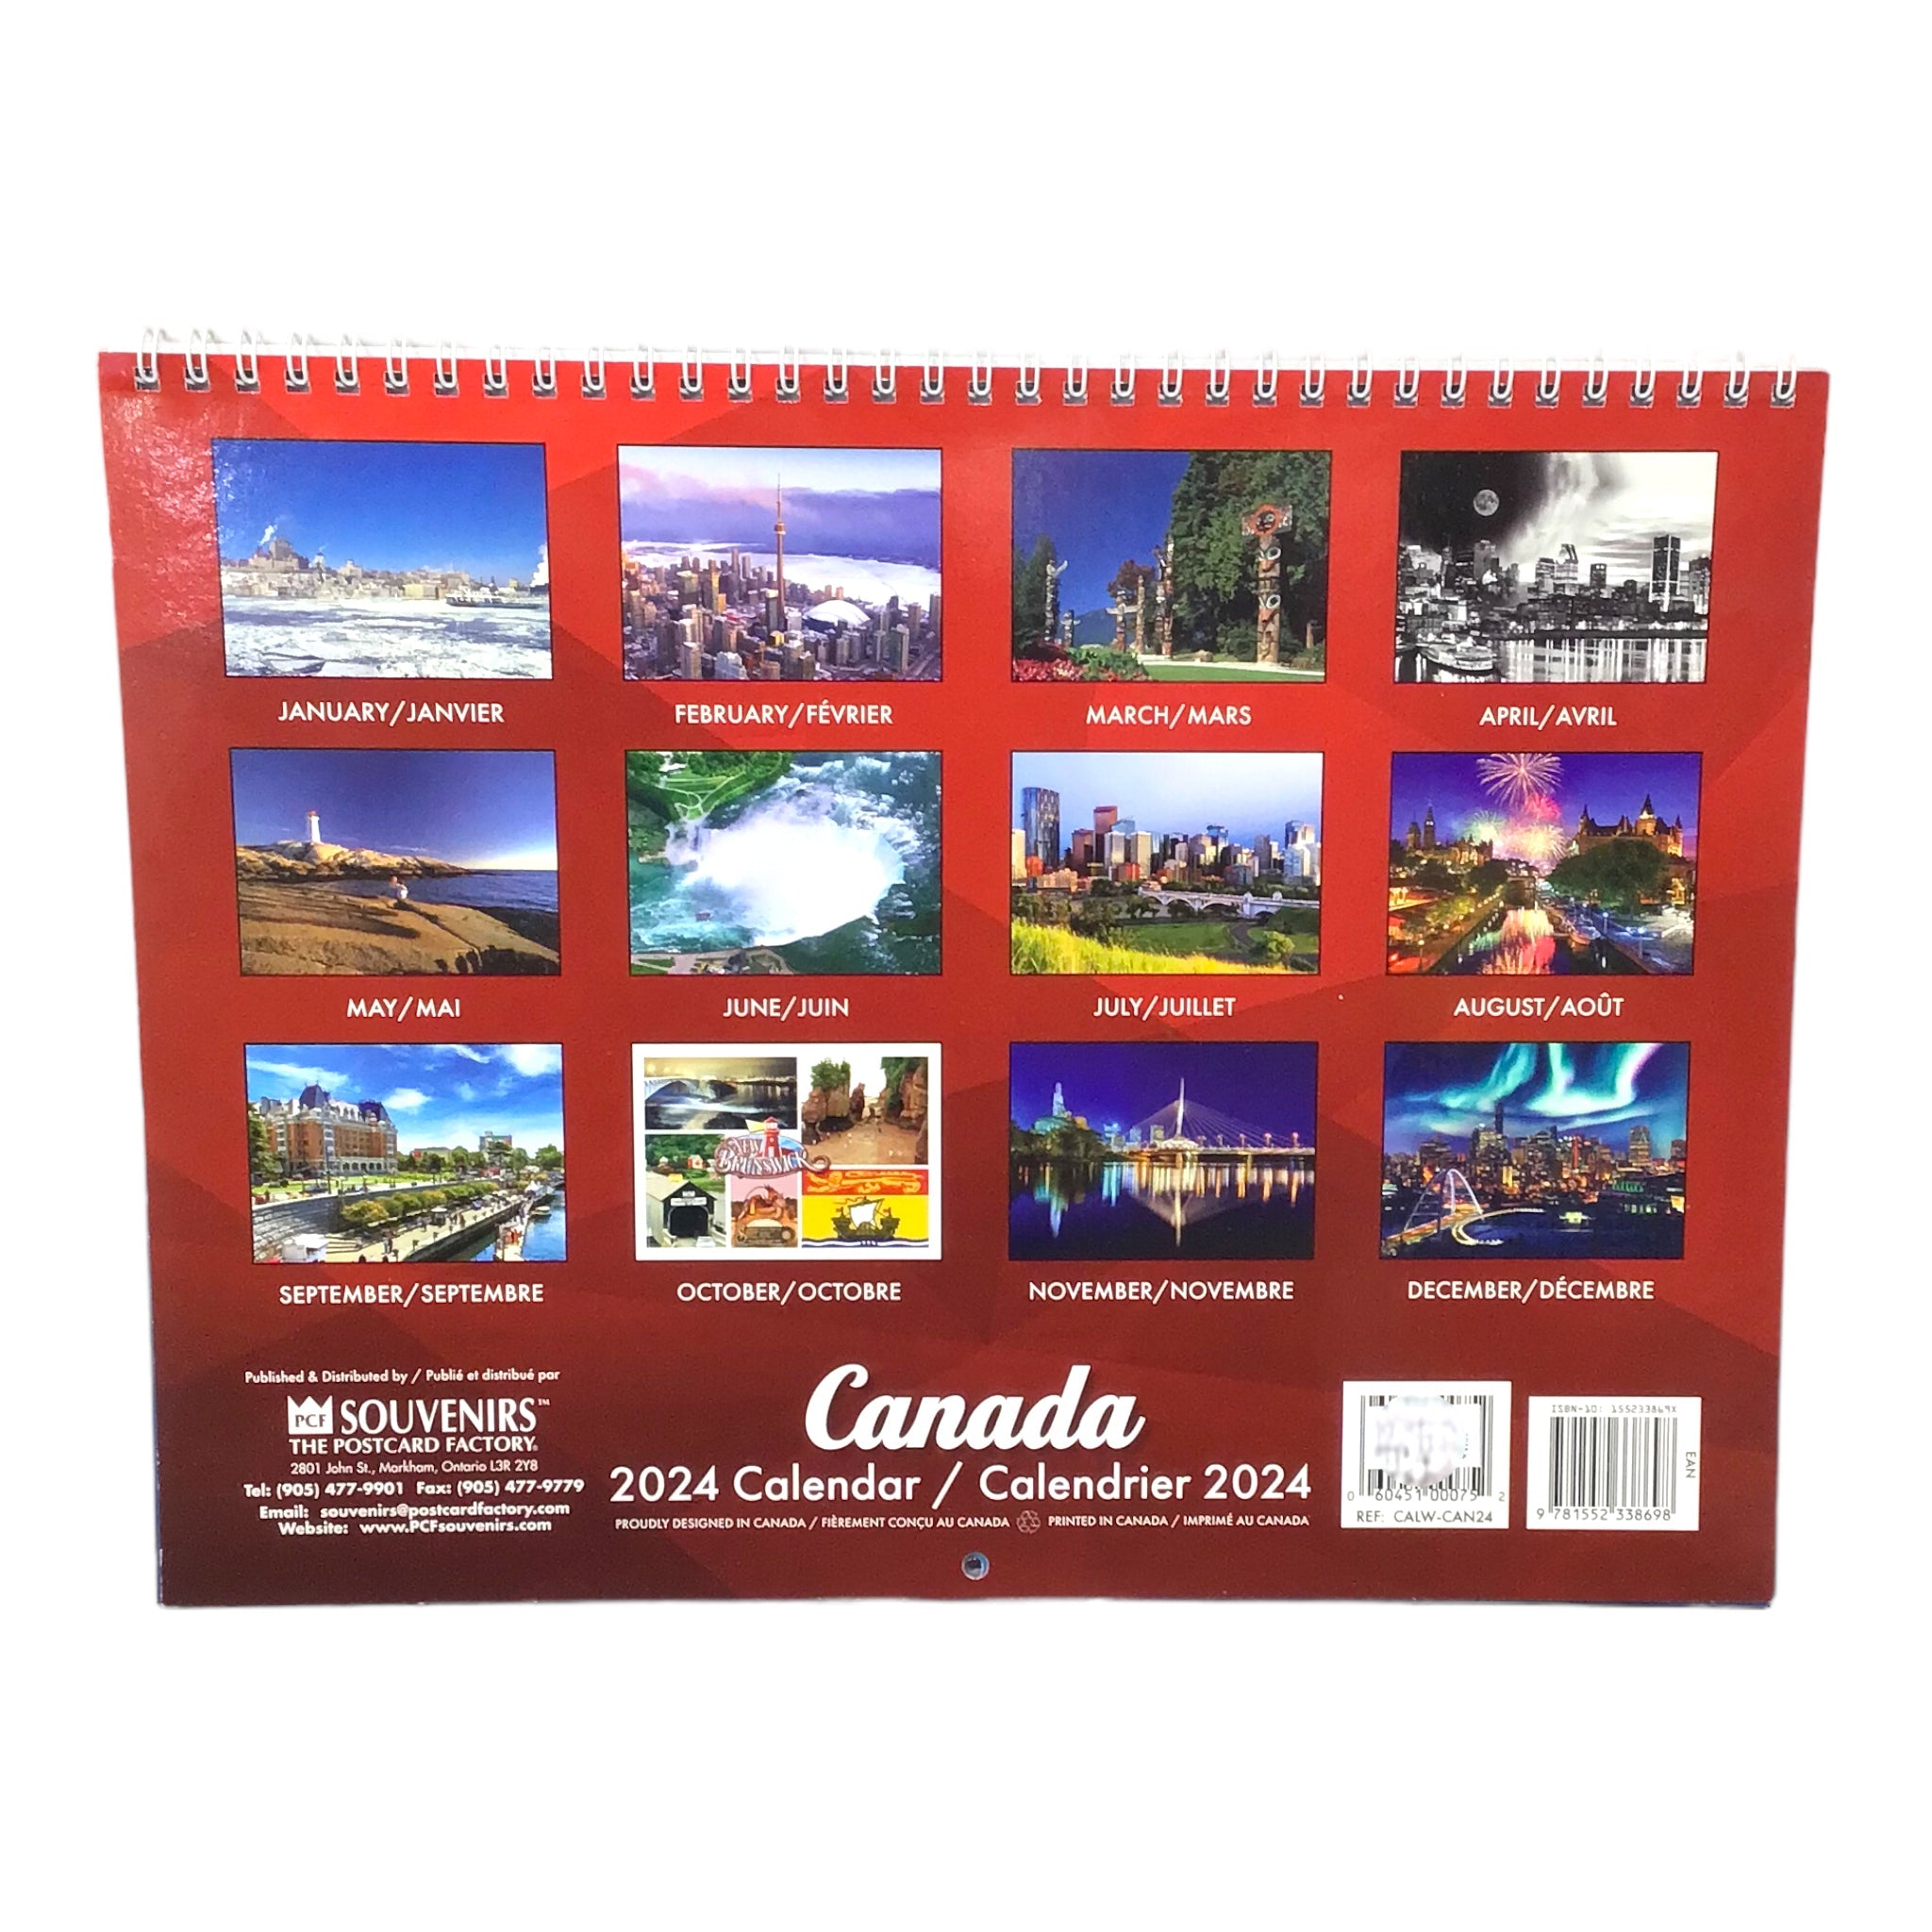 Souvenir Canada Wall Calendar 2024, Great Gift Idea For Canada Lovers! Different Province Landmark Pictures